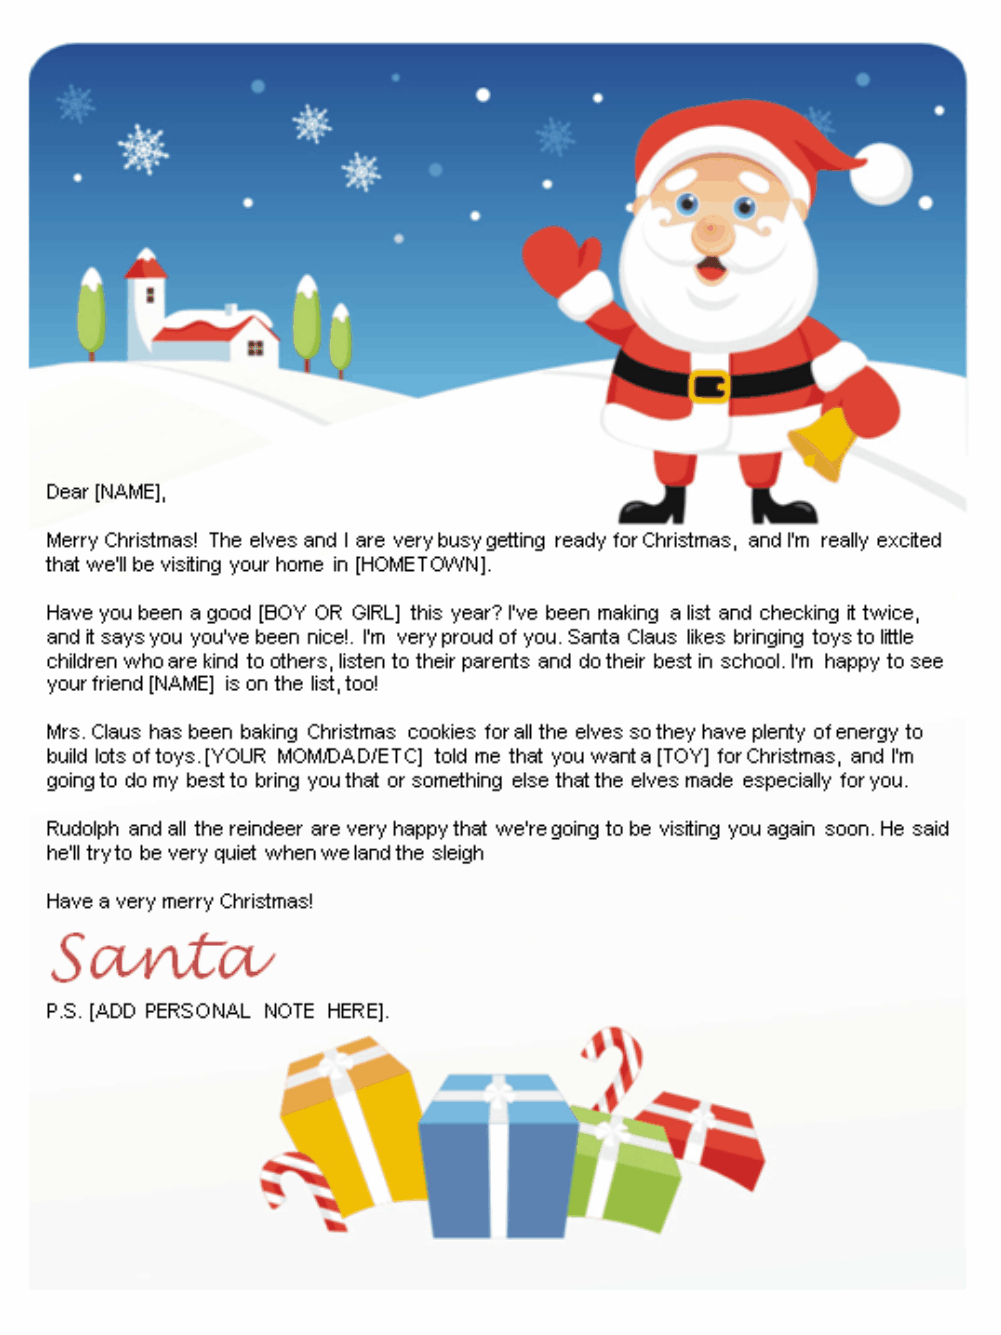 Free Letters From Santa | Santa Letters To Print At Home - Gifts - Free Printable Christmas Letters From Santa